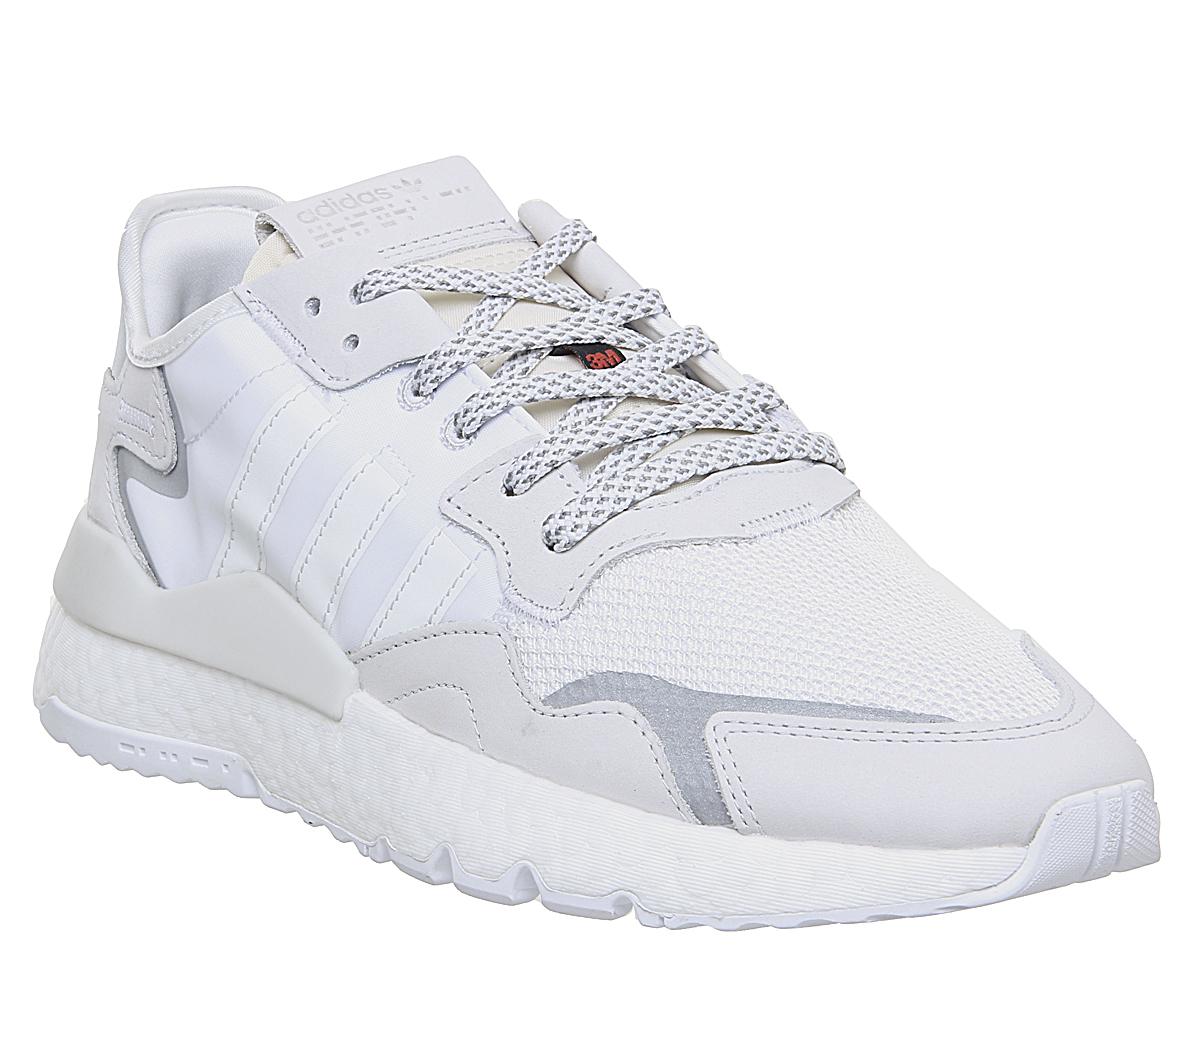 nite jogger boost trainers